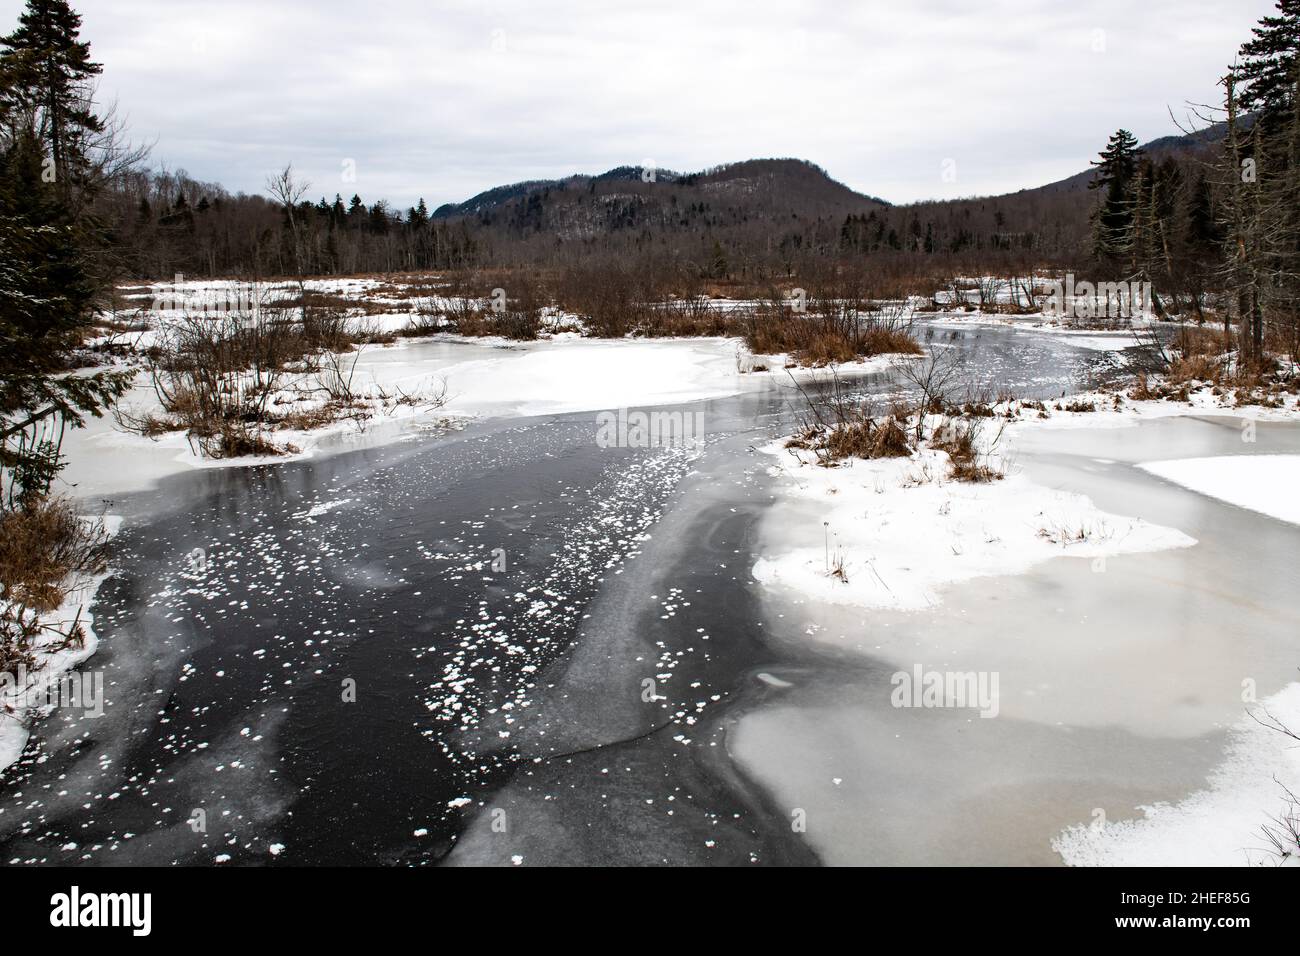 A view of the Kunjamuk River in the Adirondack Mountains in winter with snow and ice on the water. Stock Photo